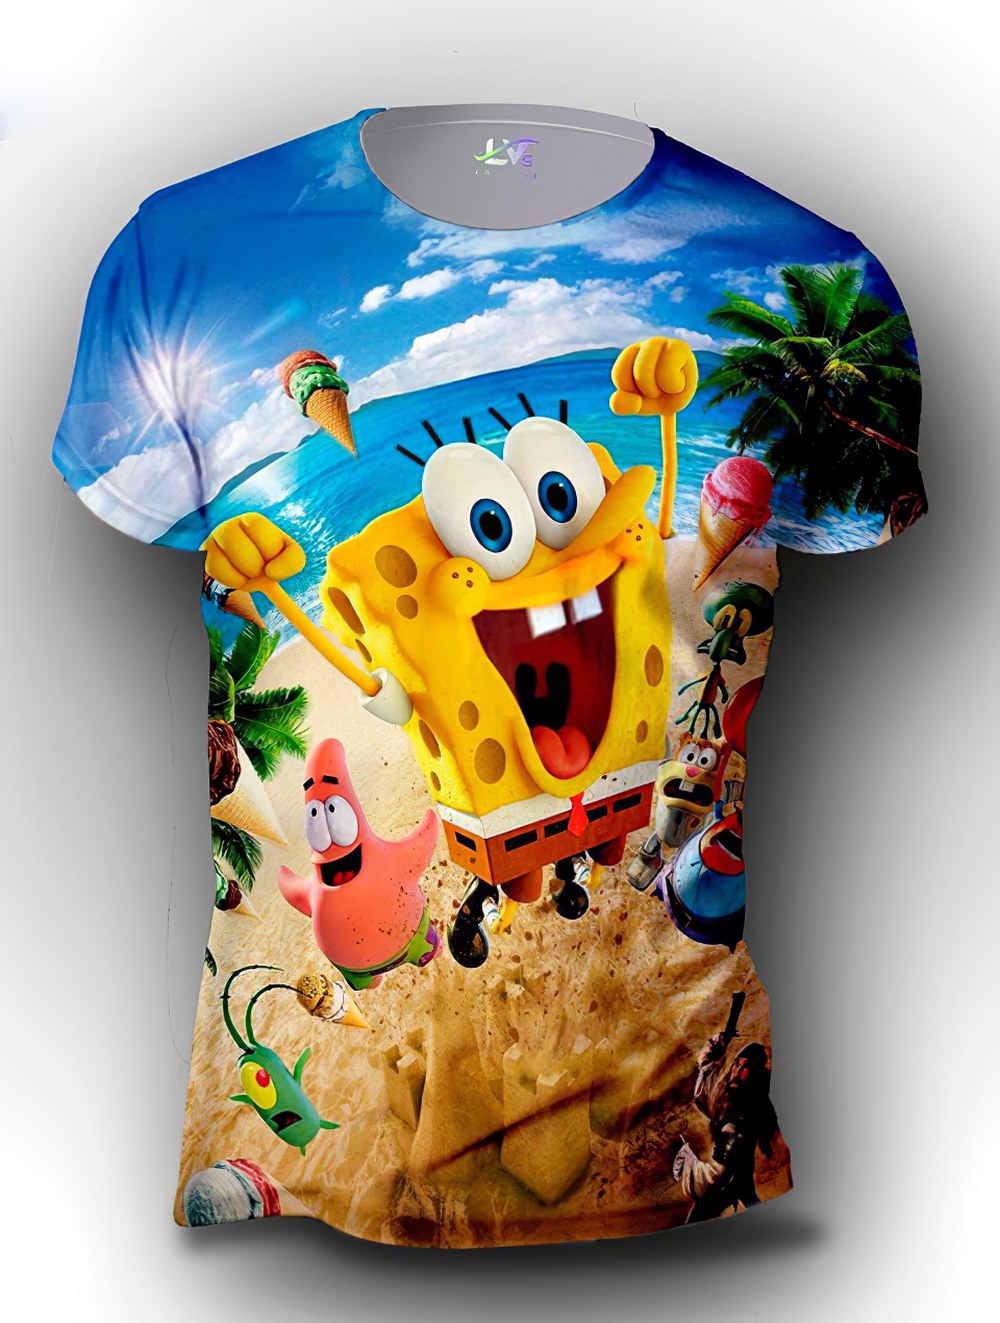 Gangster Spongebob On The Beach 3d Shirts Full Size Up To 5xl